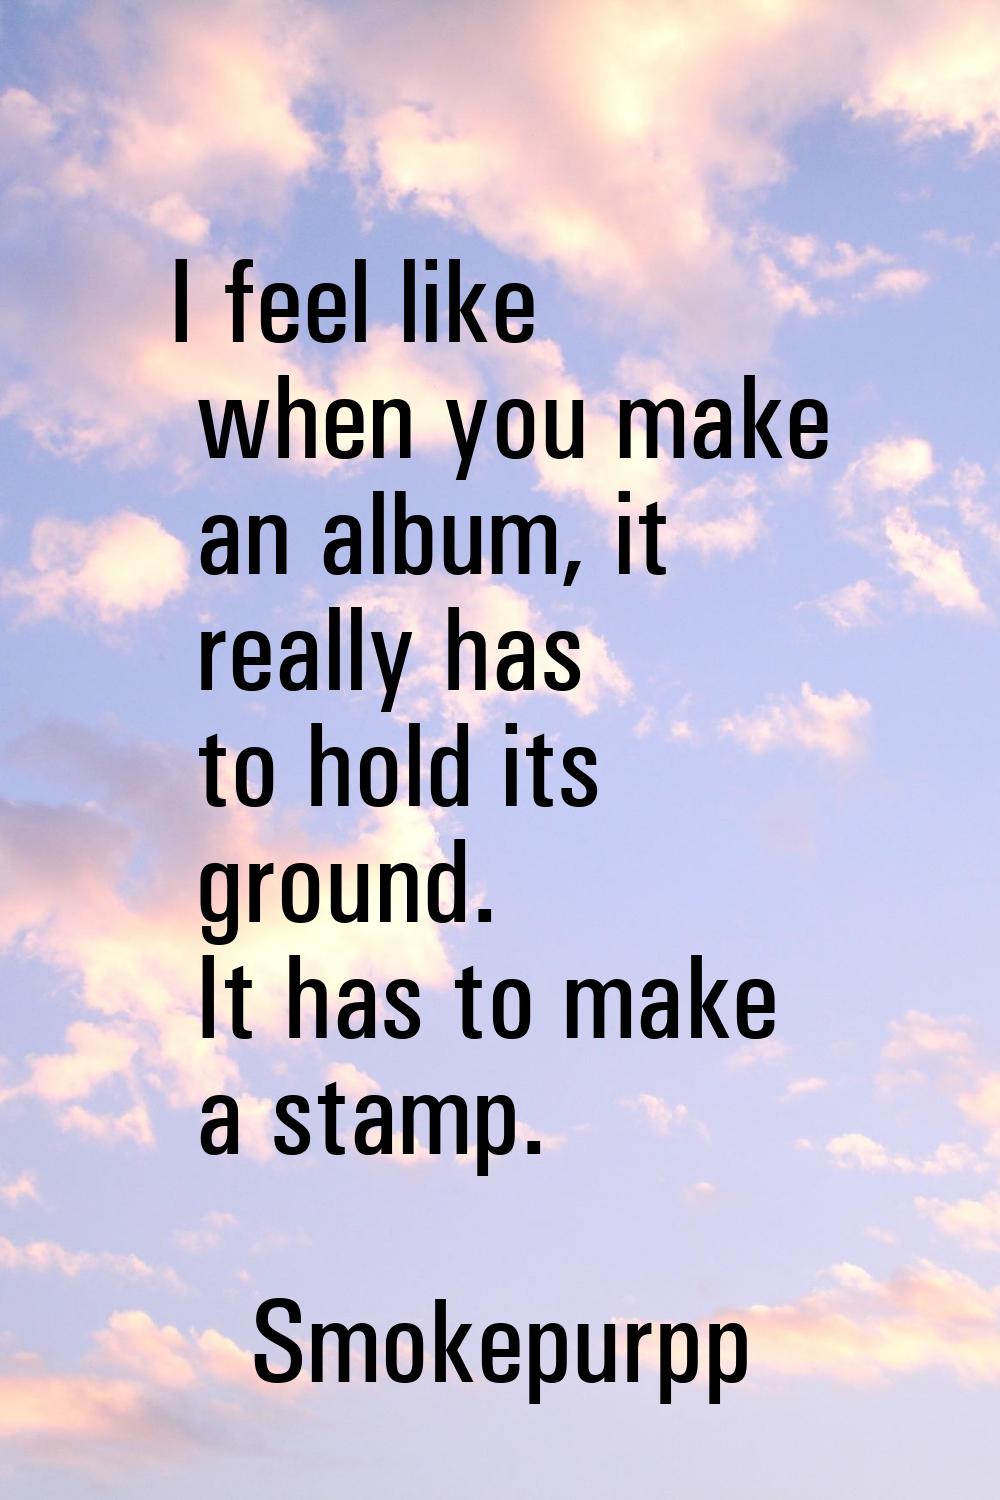 I feel like when you make an album, it really has to hold its ground. It has to make a stamp.